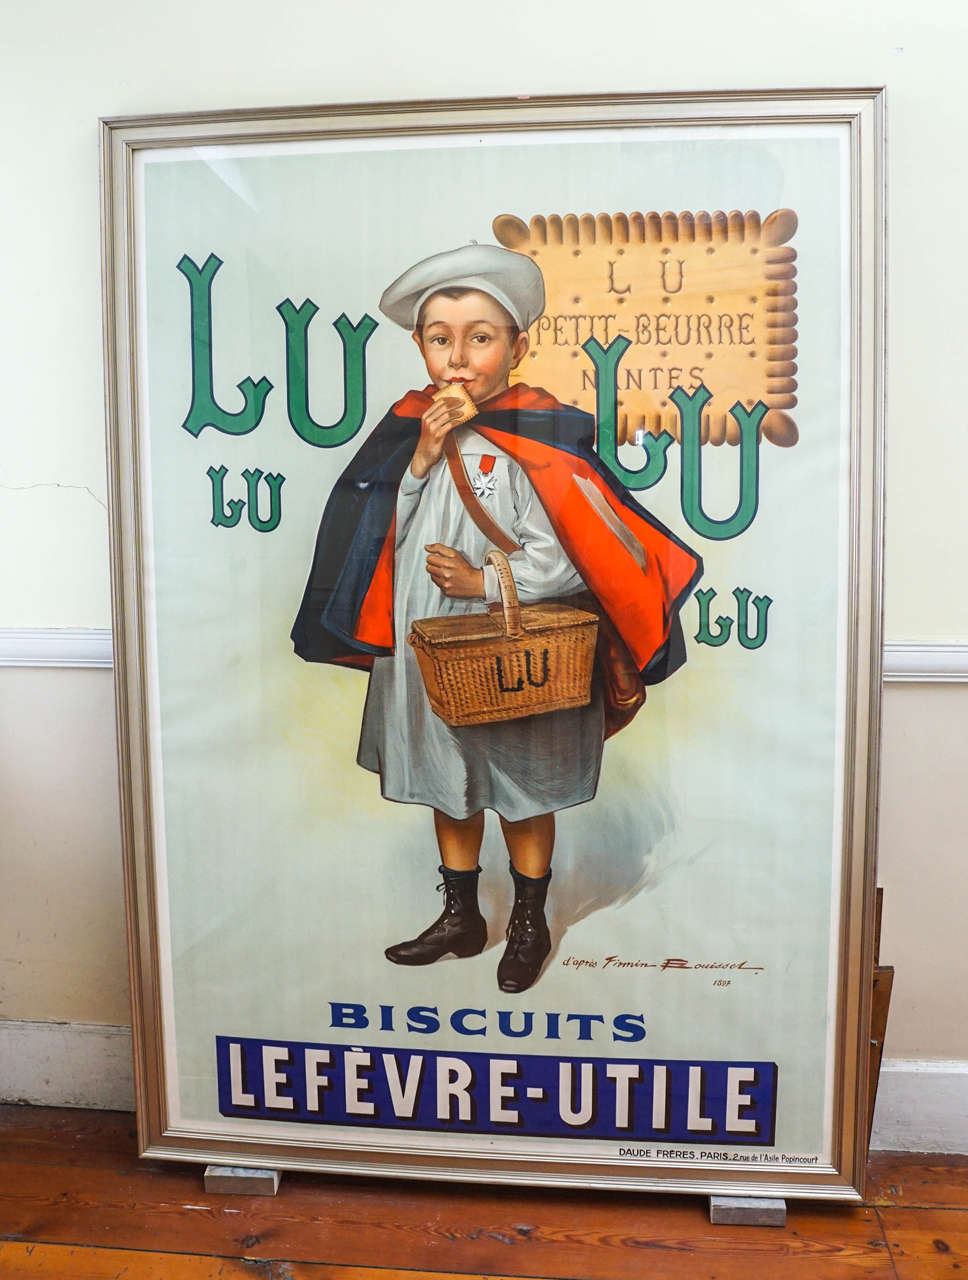 Very large LU biscuit (Lefevre-Utile) poster, circa 1897. After Firmin Bouisset.
(1859-1925). Printed by Daude Freres, Paris. Charming young boy (petit ecolier) with blue and red cape carrying basket of biscuits and sampling one for good measure.